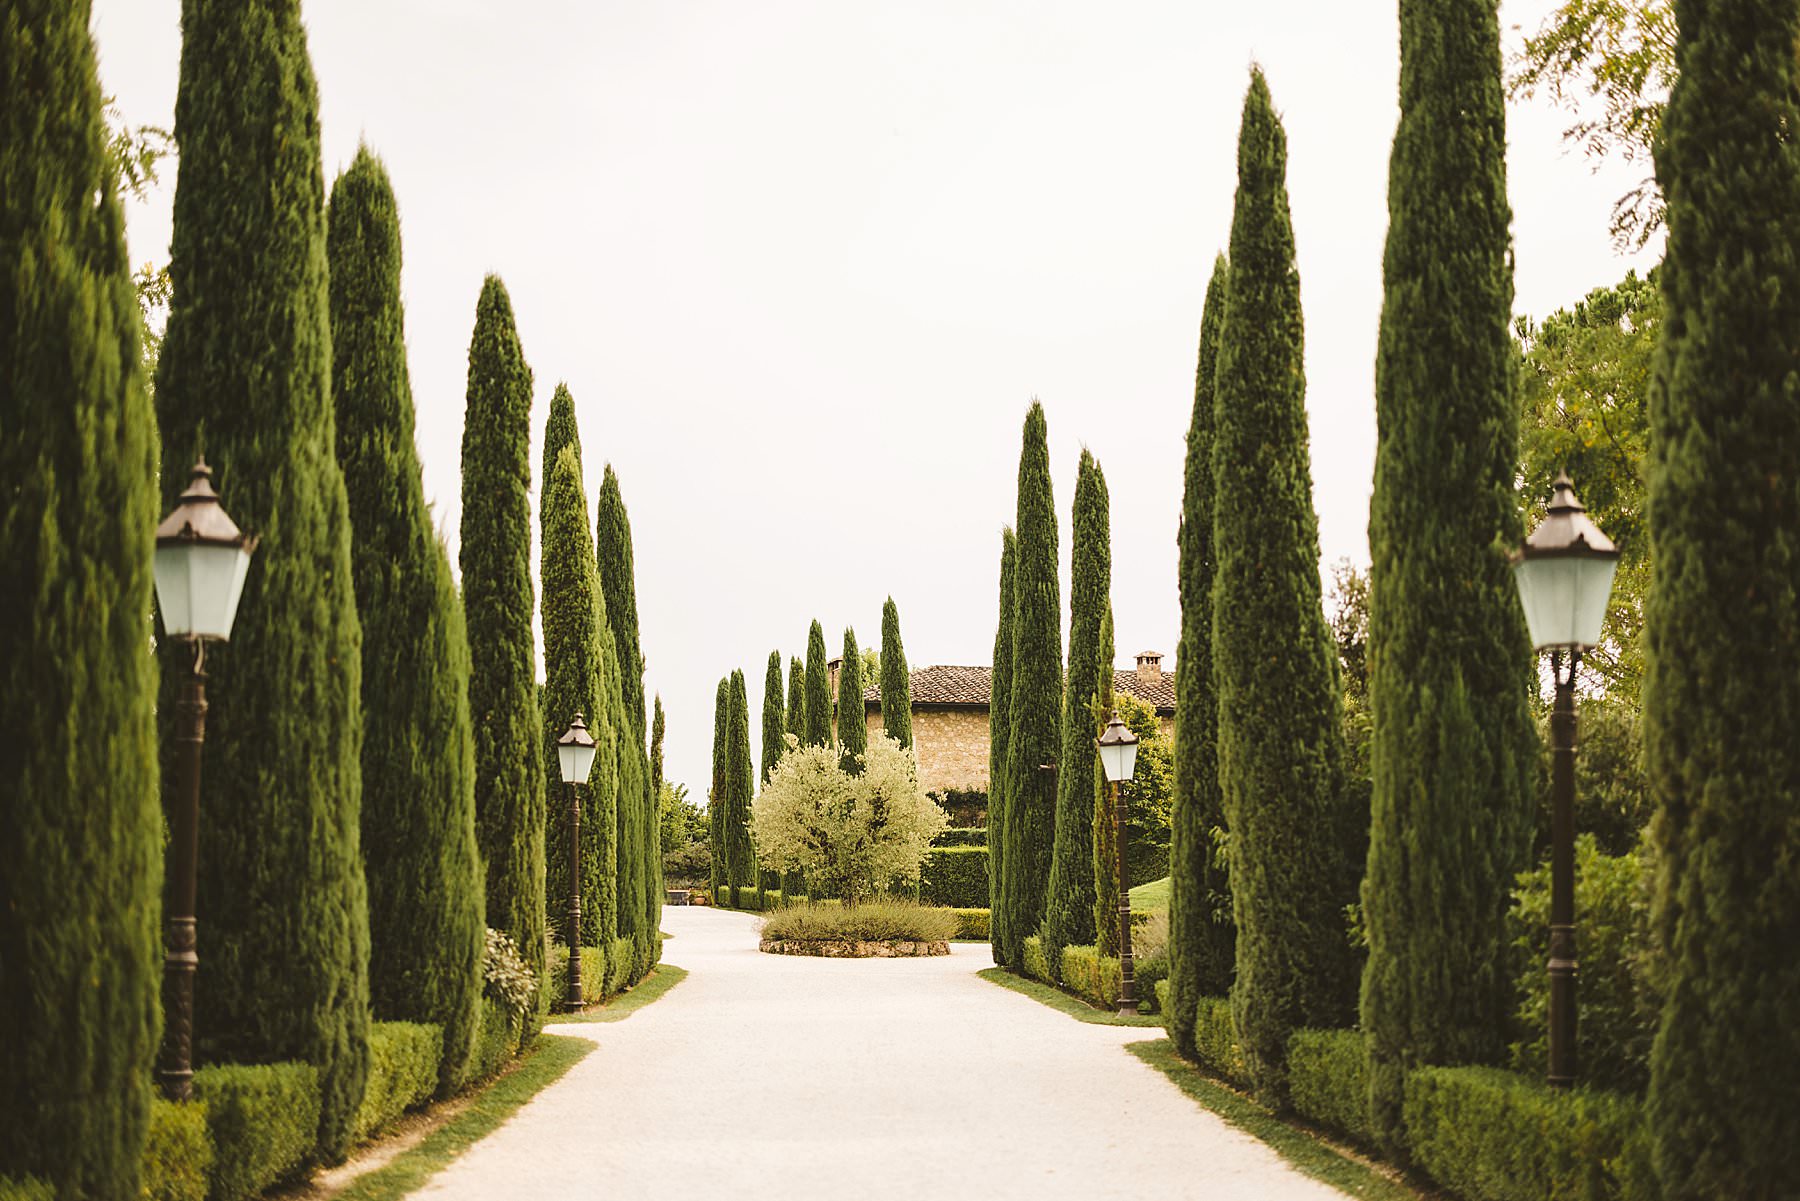 Luxury resort Borgo Santo Pietro with the cypress avenue is an amazing location for a shooting. It offers so many different backgrounds that you don’t really need anything else